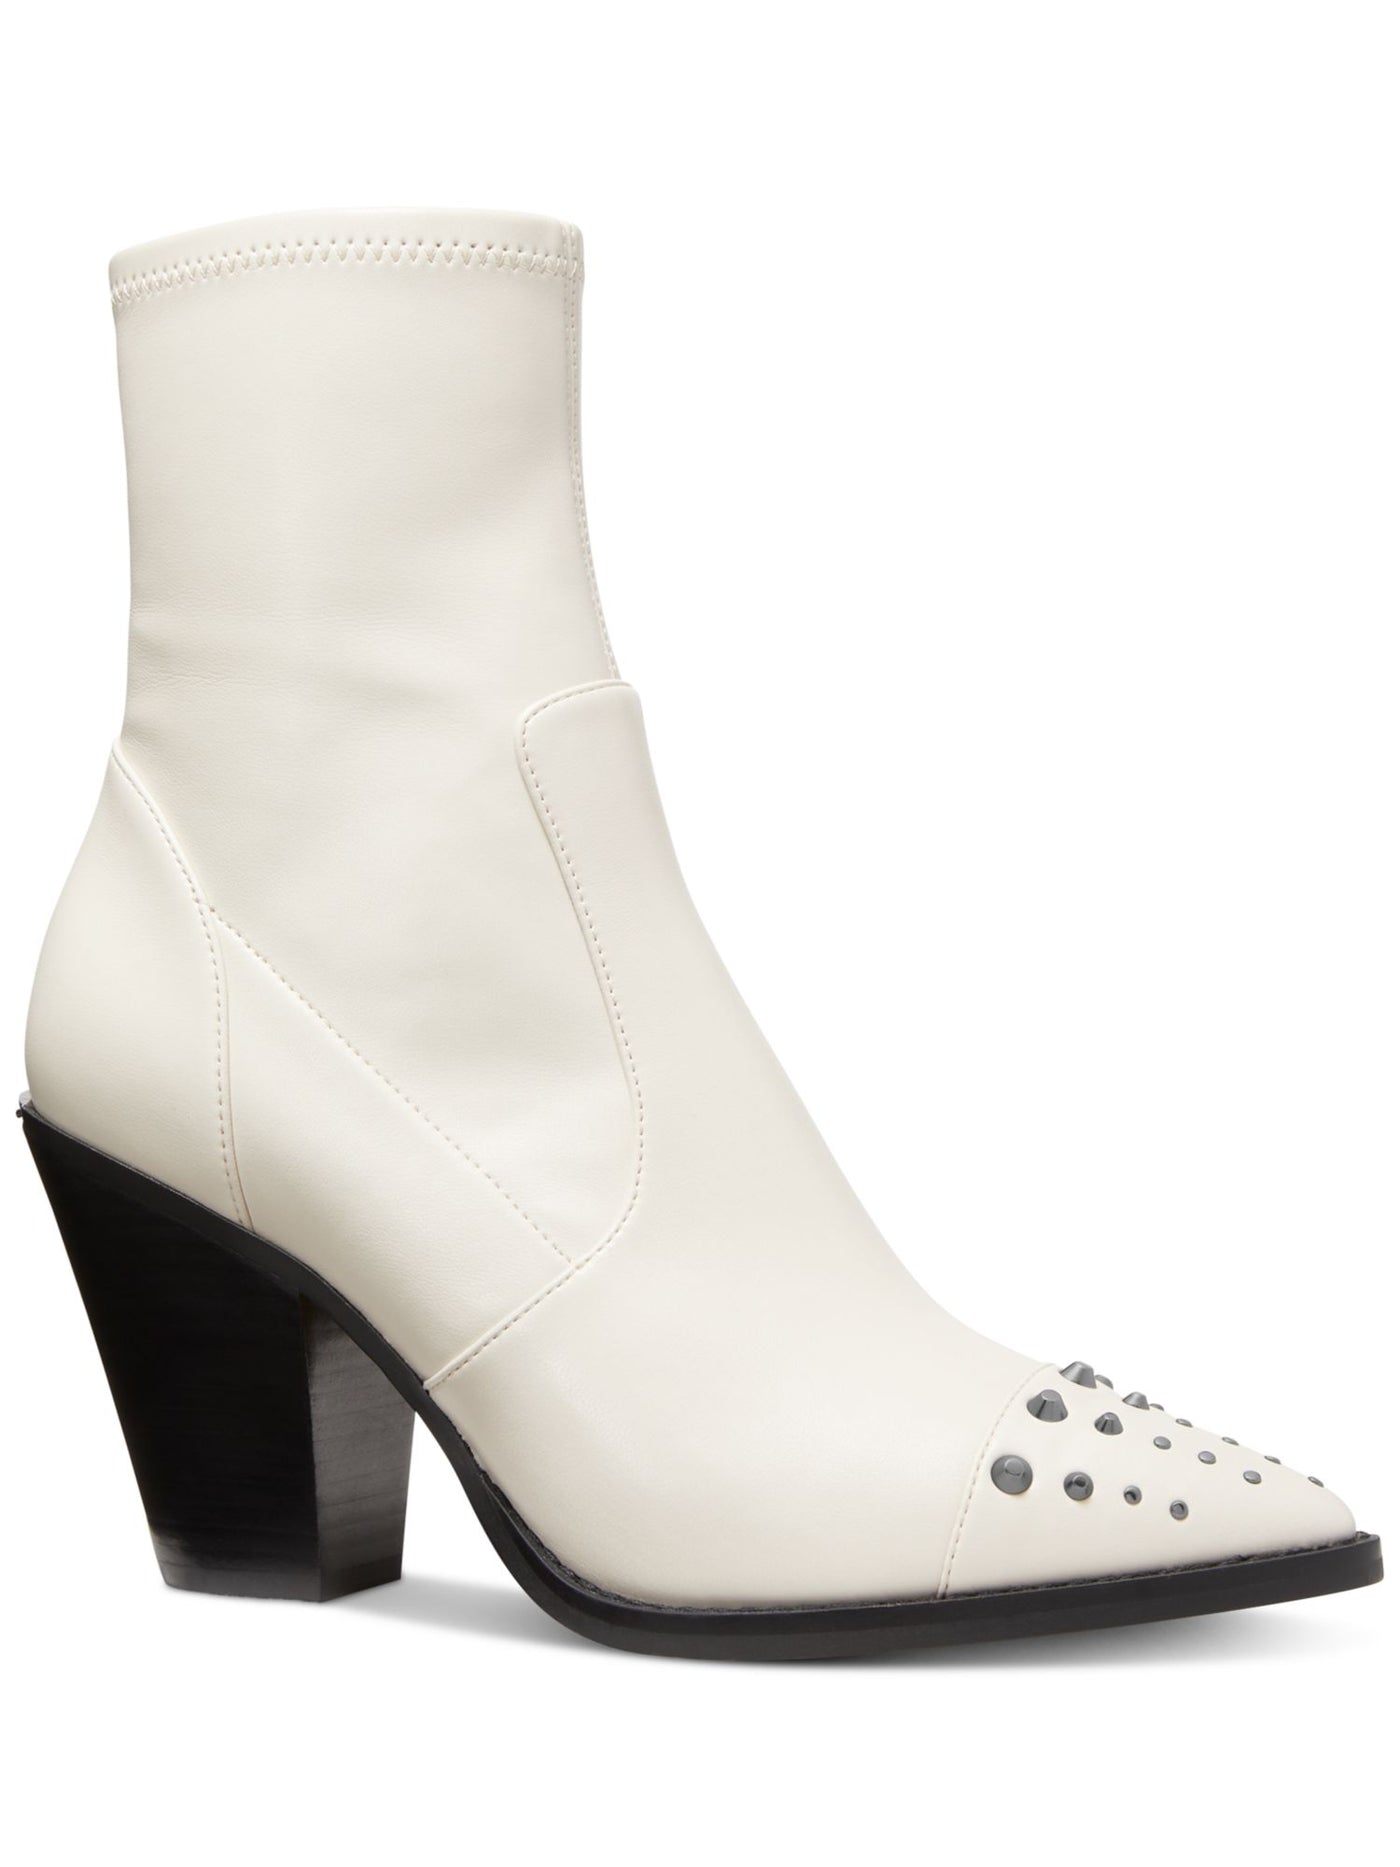 MICHAEL MICHAEL KORS Womens Ivory Studded Dover Pointed Toe Stacked Heel Zip-Up Dress Booties 7 M